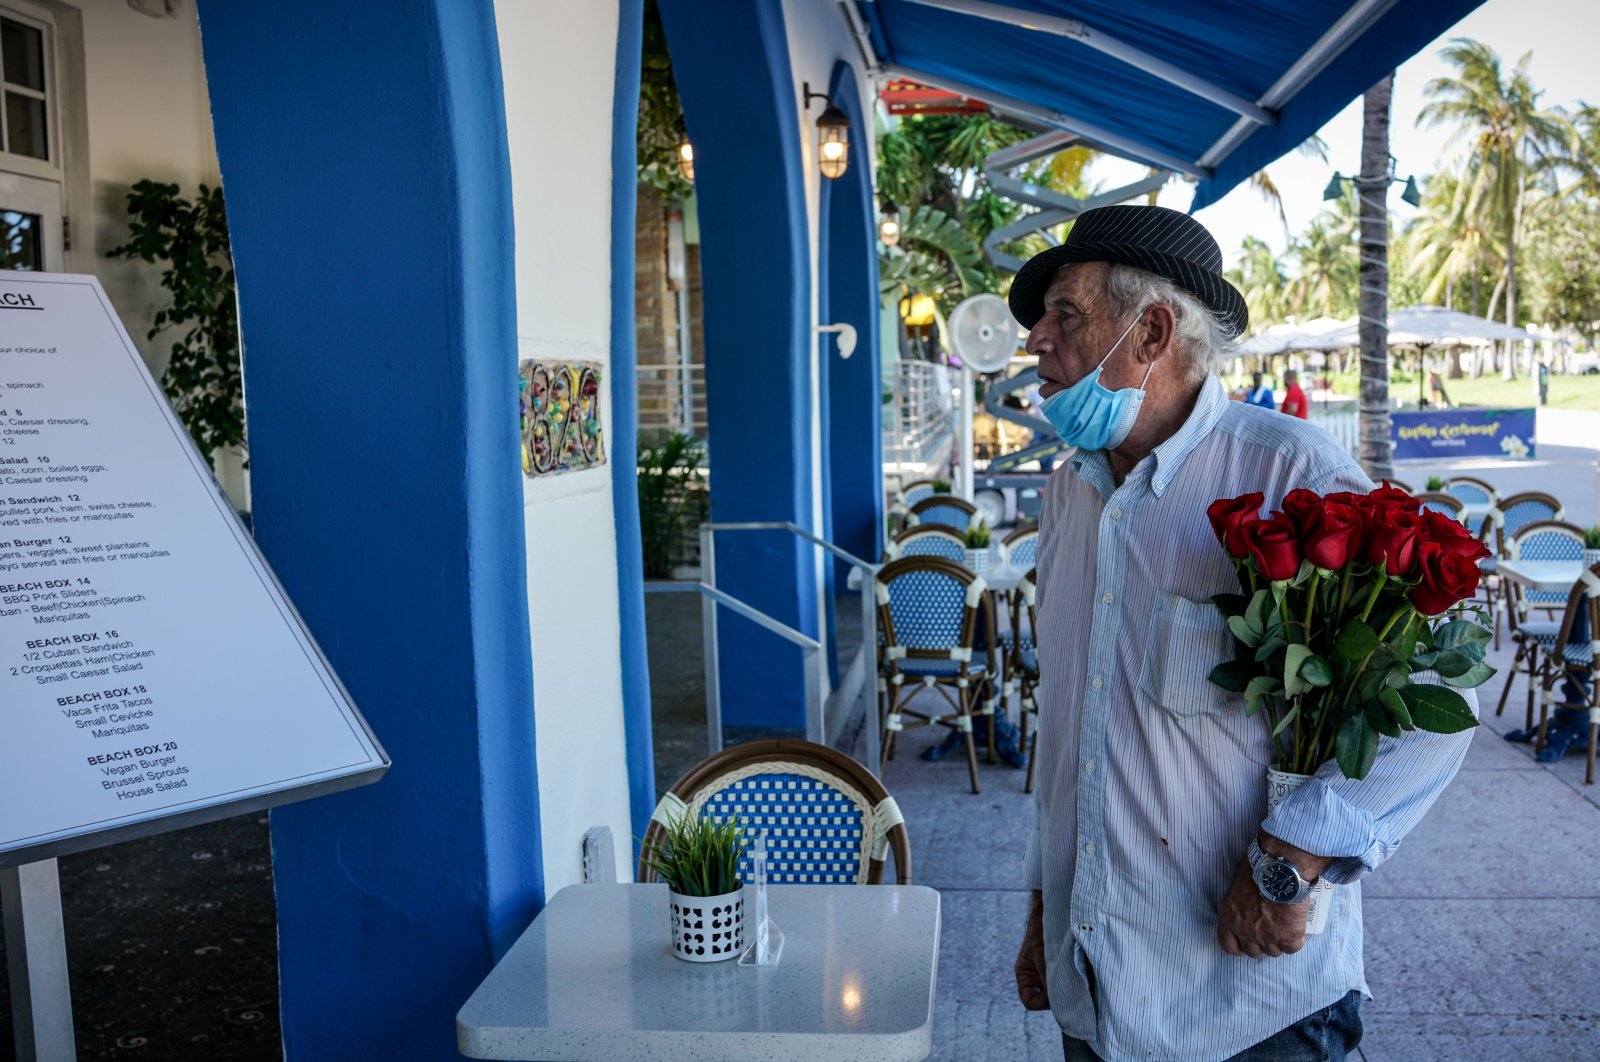 In this file photo taken on June 9, 2020, an elderly man holds a bouquet of roses as he looks at the menu outside a restaurant on Ocean Drive in South Beach, Miami. (AFP Photo)